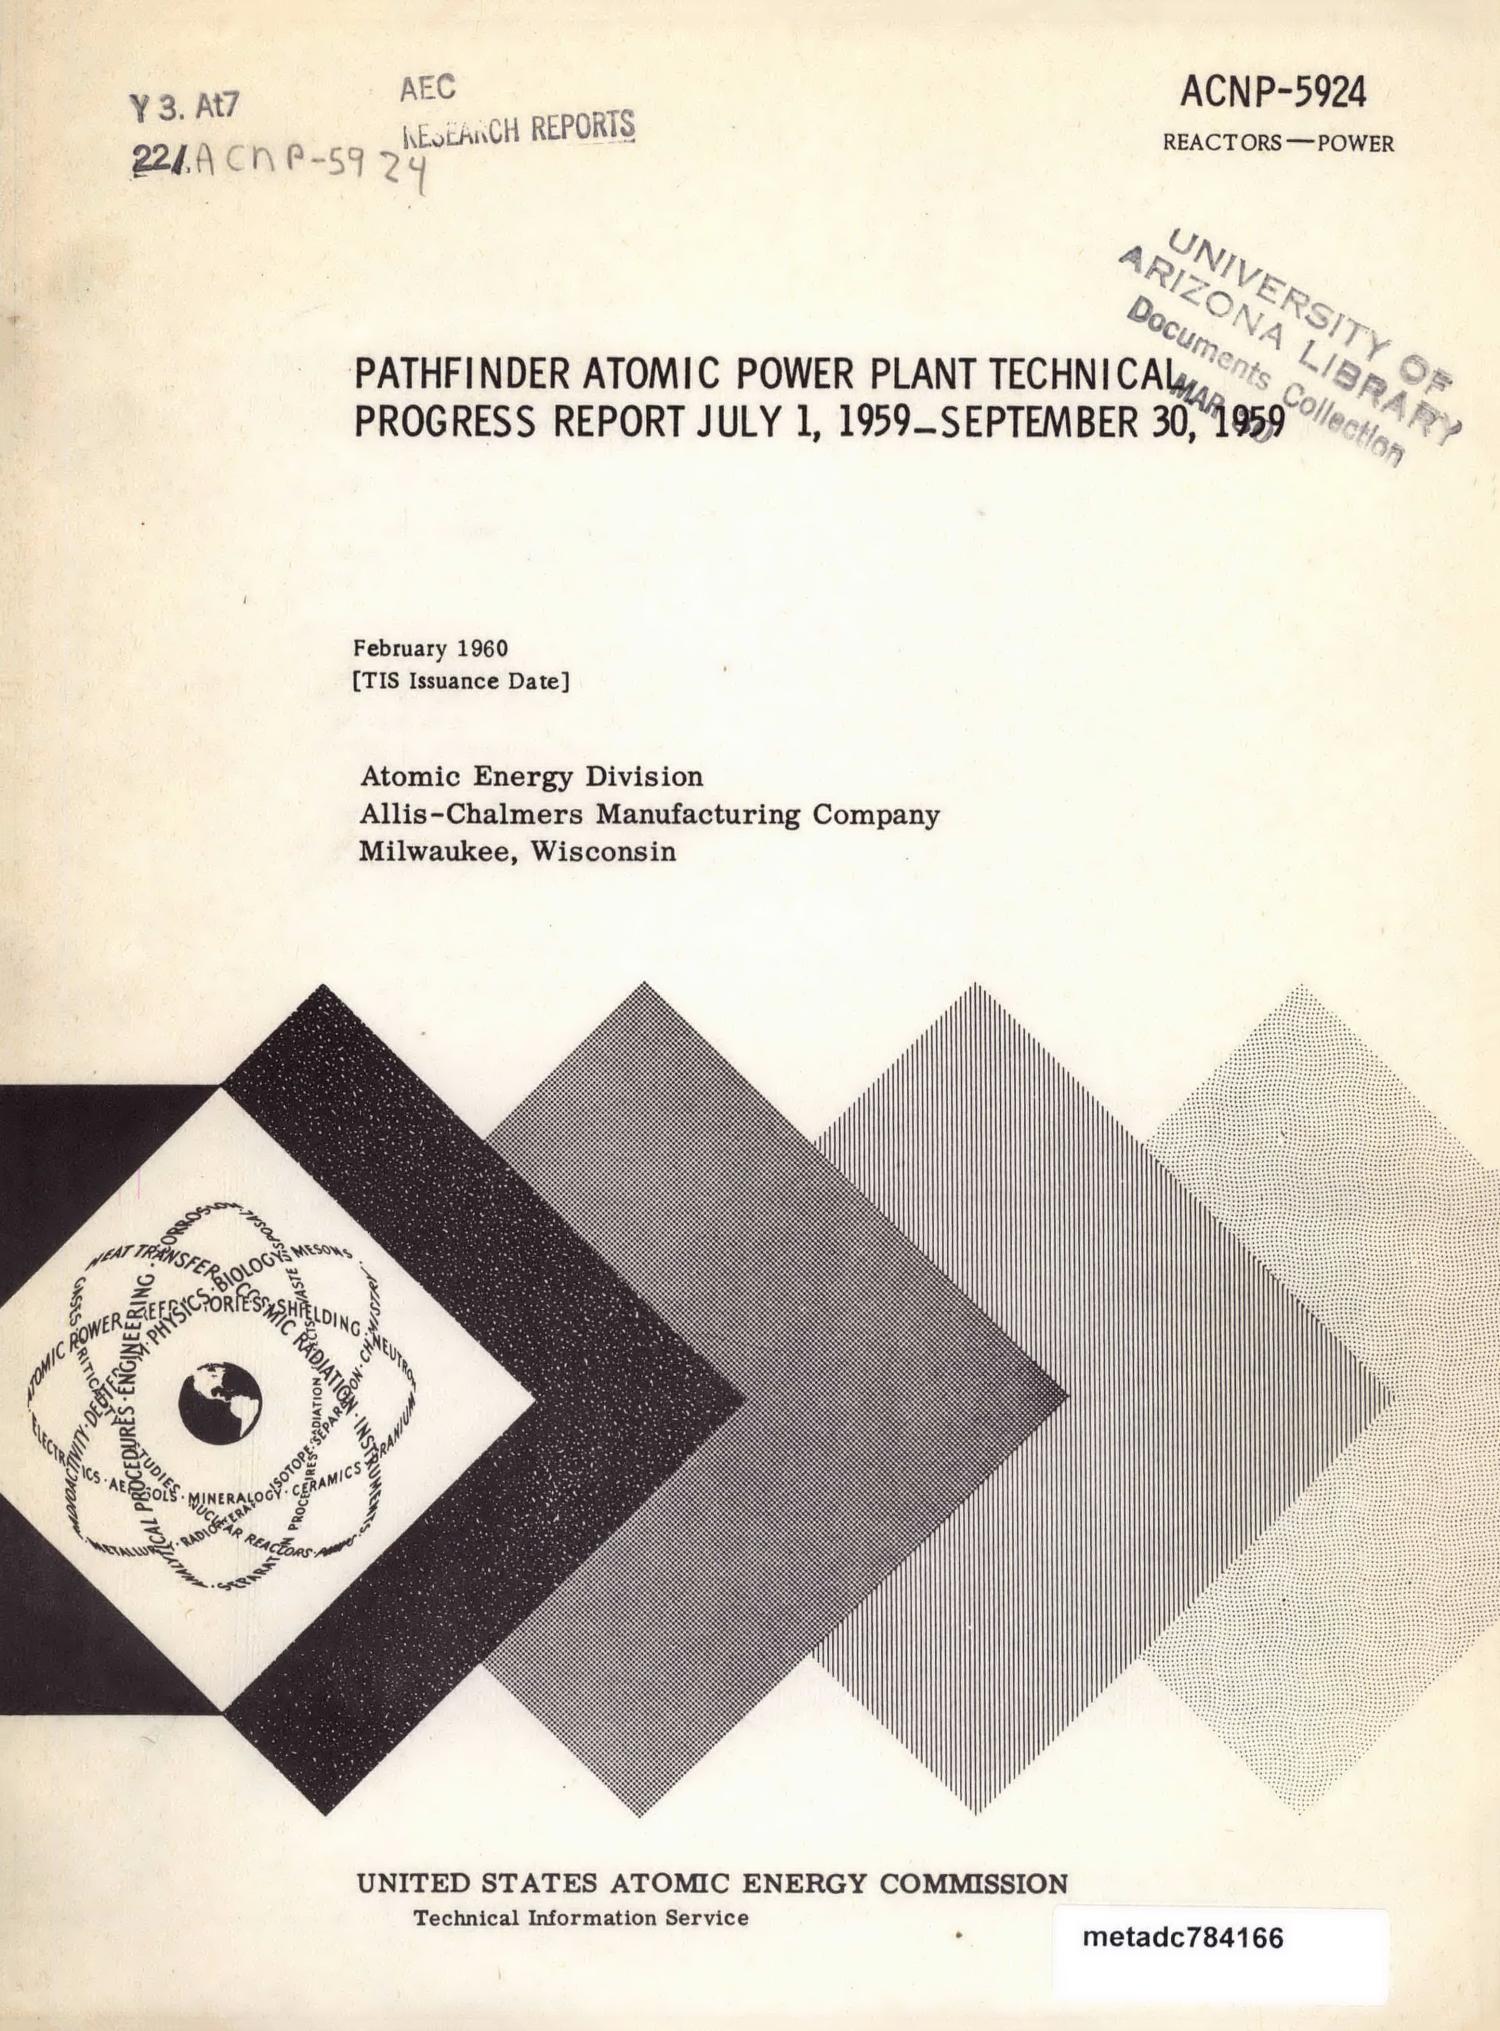 Pathfinder Atomic Power Plant Technical Progress Report: July 1, 1959-September 30, 1959
                                                
                                                    Front Cover
                                                